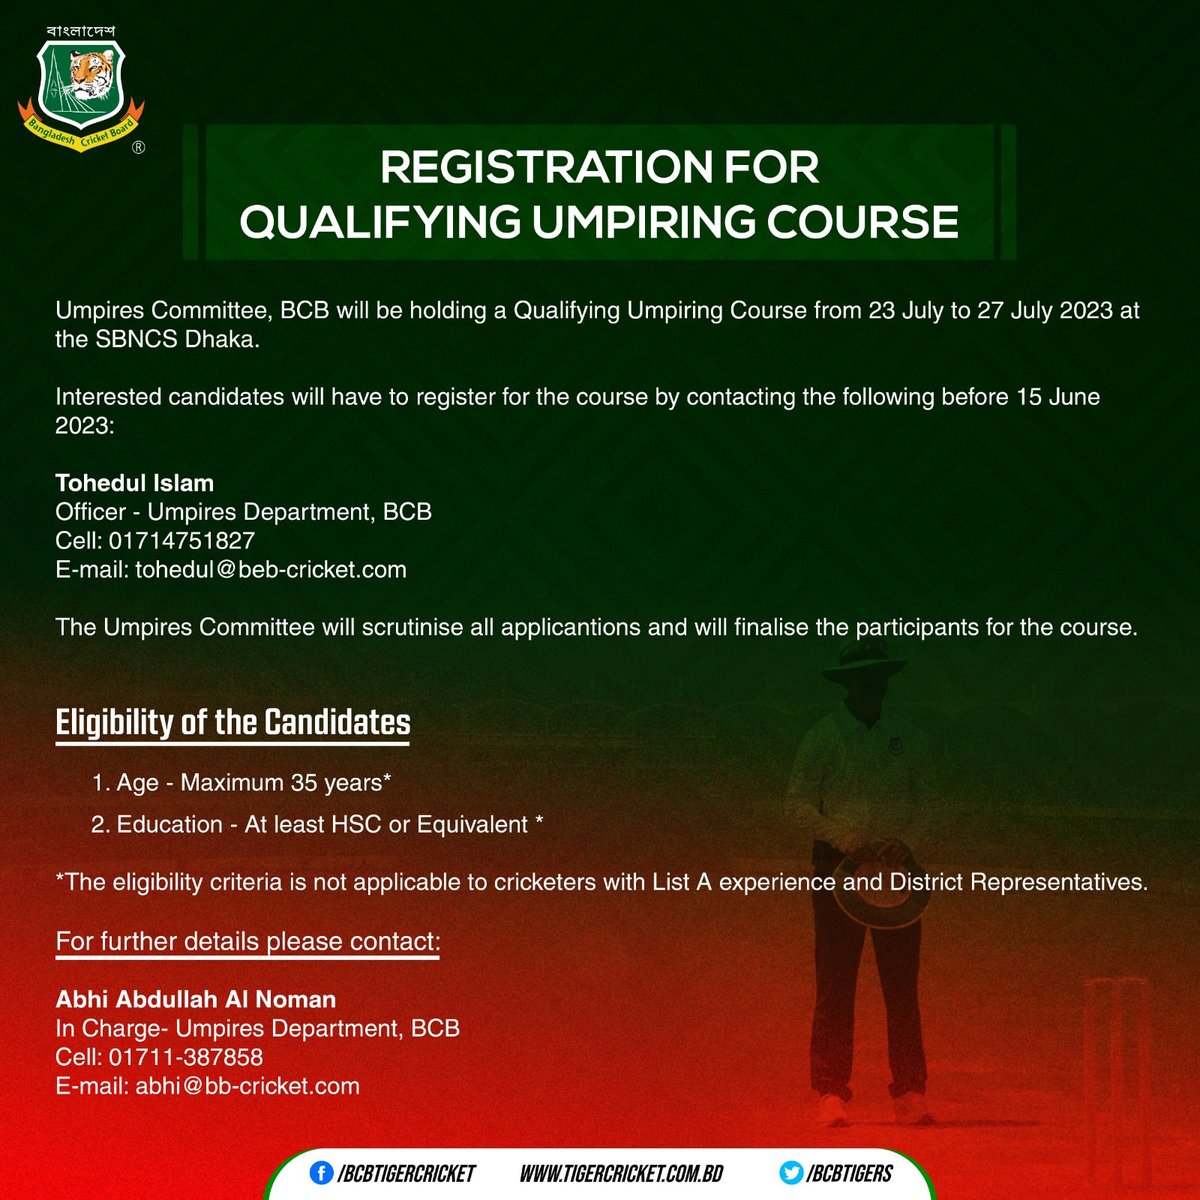 Bangladesh Cricket on Twitter: "Registration for Qualifying Umpiring Course:  Umpires Committee, BCB will be holding a Qualifying Umpiring Course from 23  July to 27 July 2023 at the SBNCS Dhaka. Interested candidates